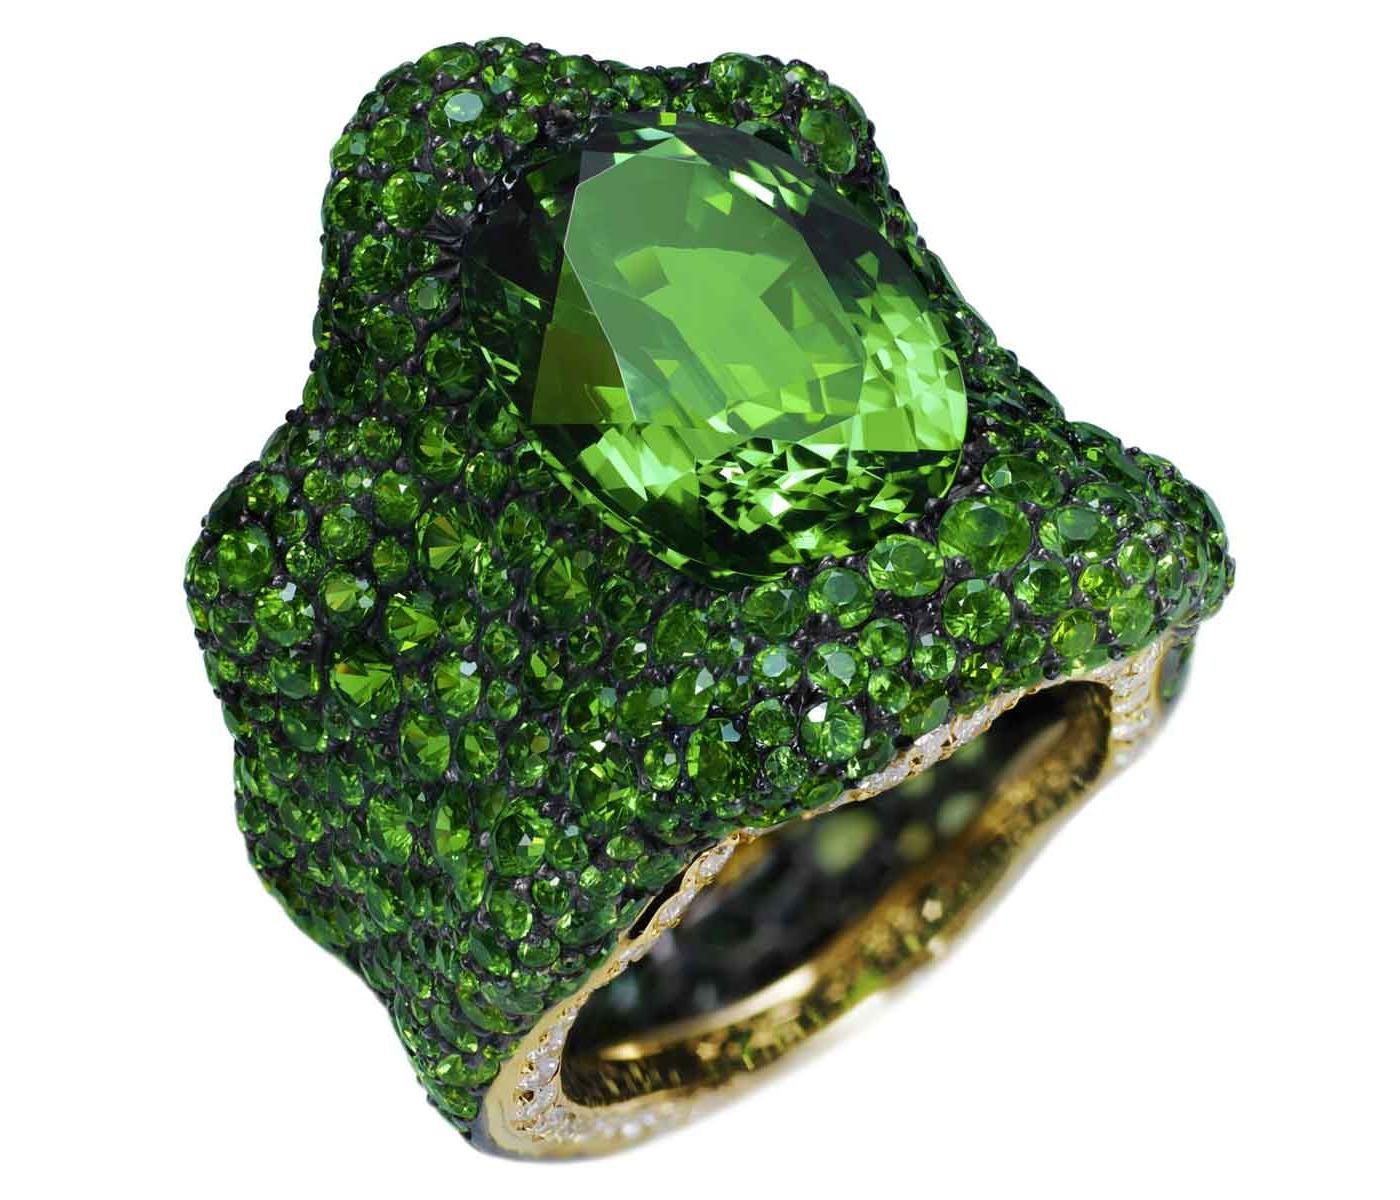 Ring by Fabergé